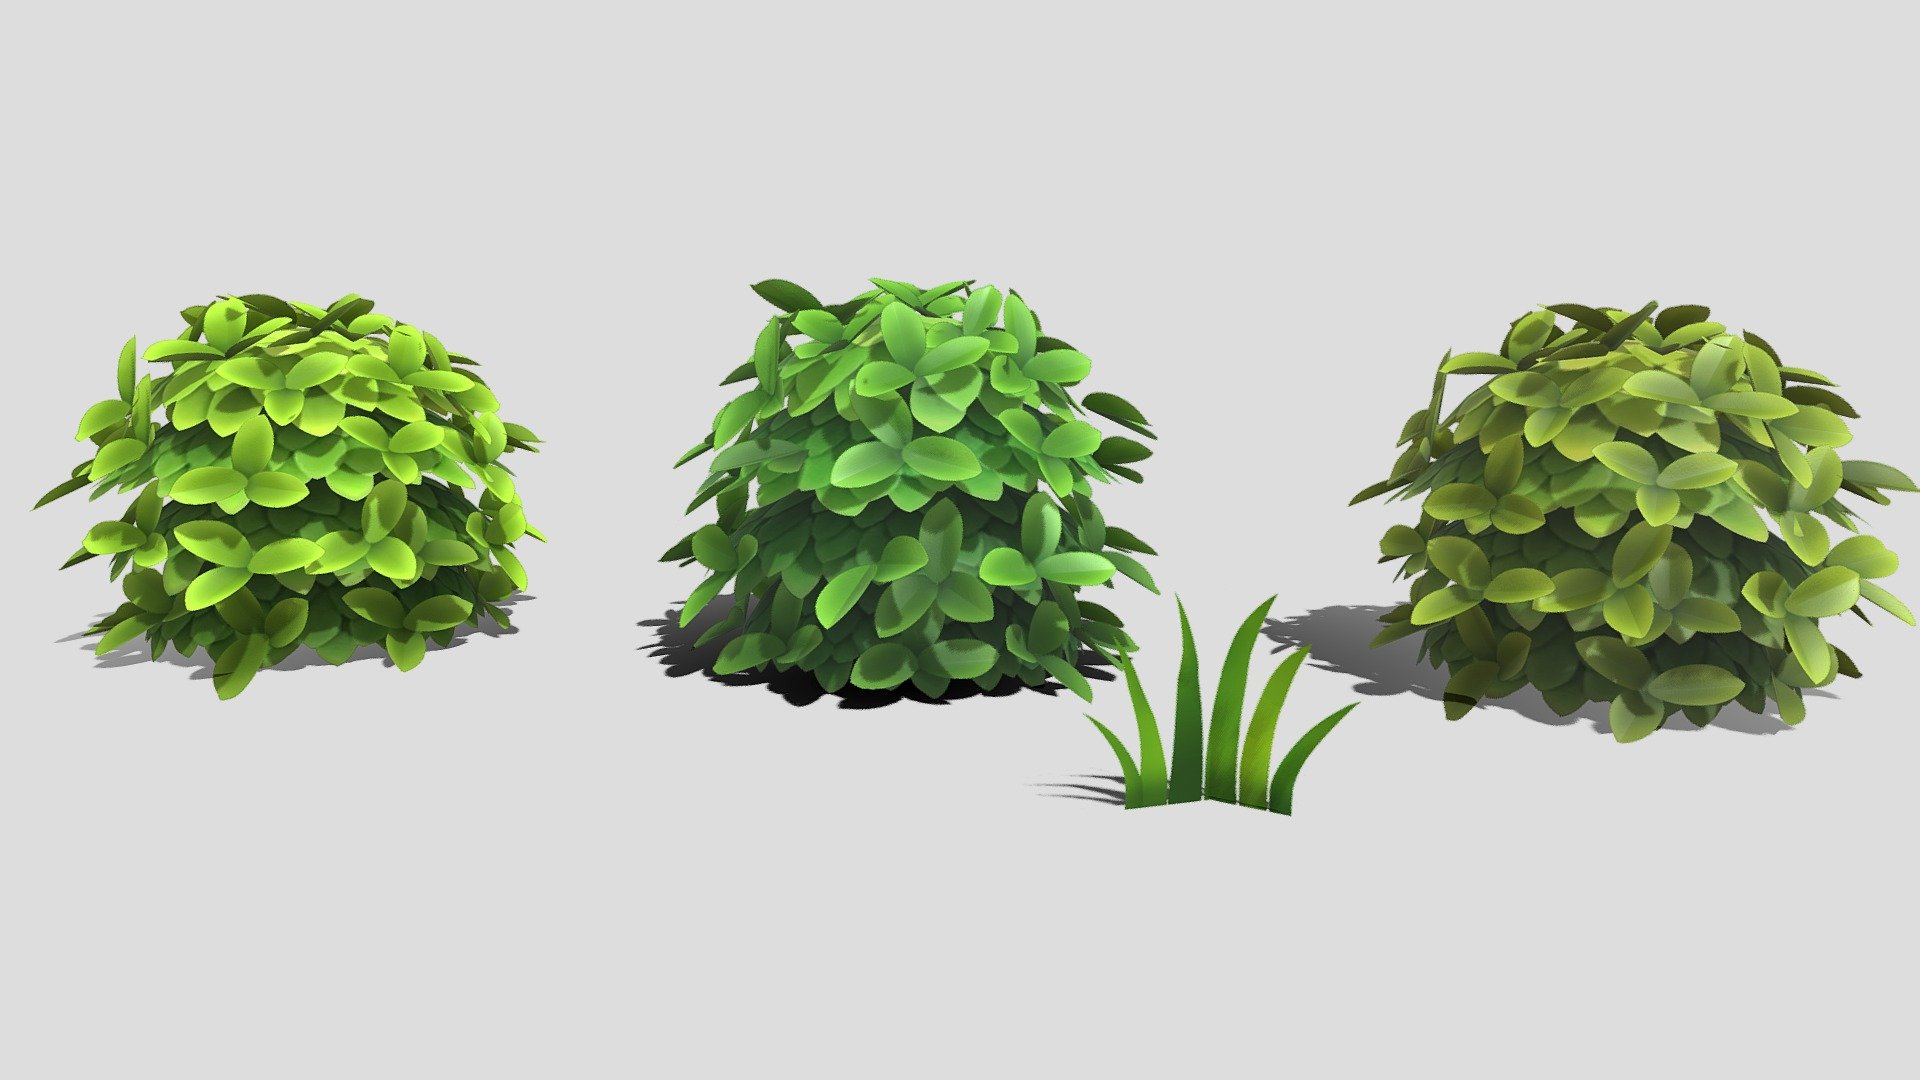 Fantastic Lowpolygon Bush

3d Max Modeling.

total  3,189 Verts.

texture made with photoshop 3d model